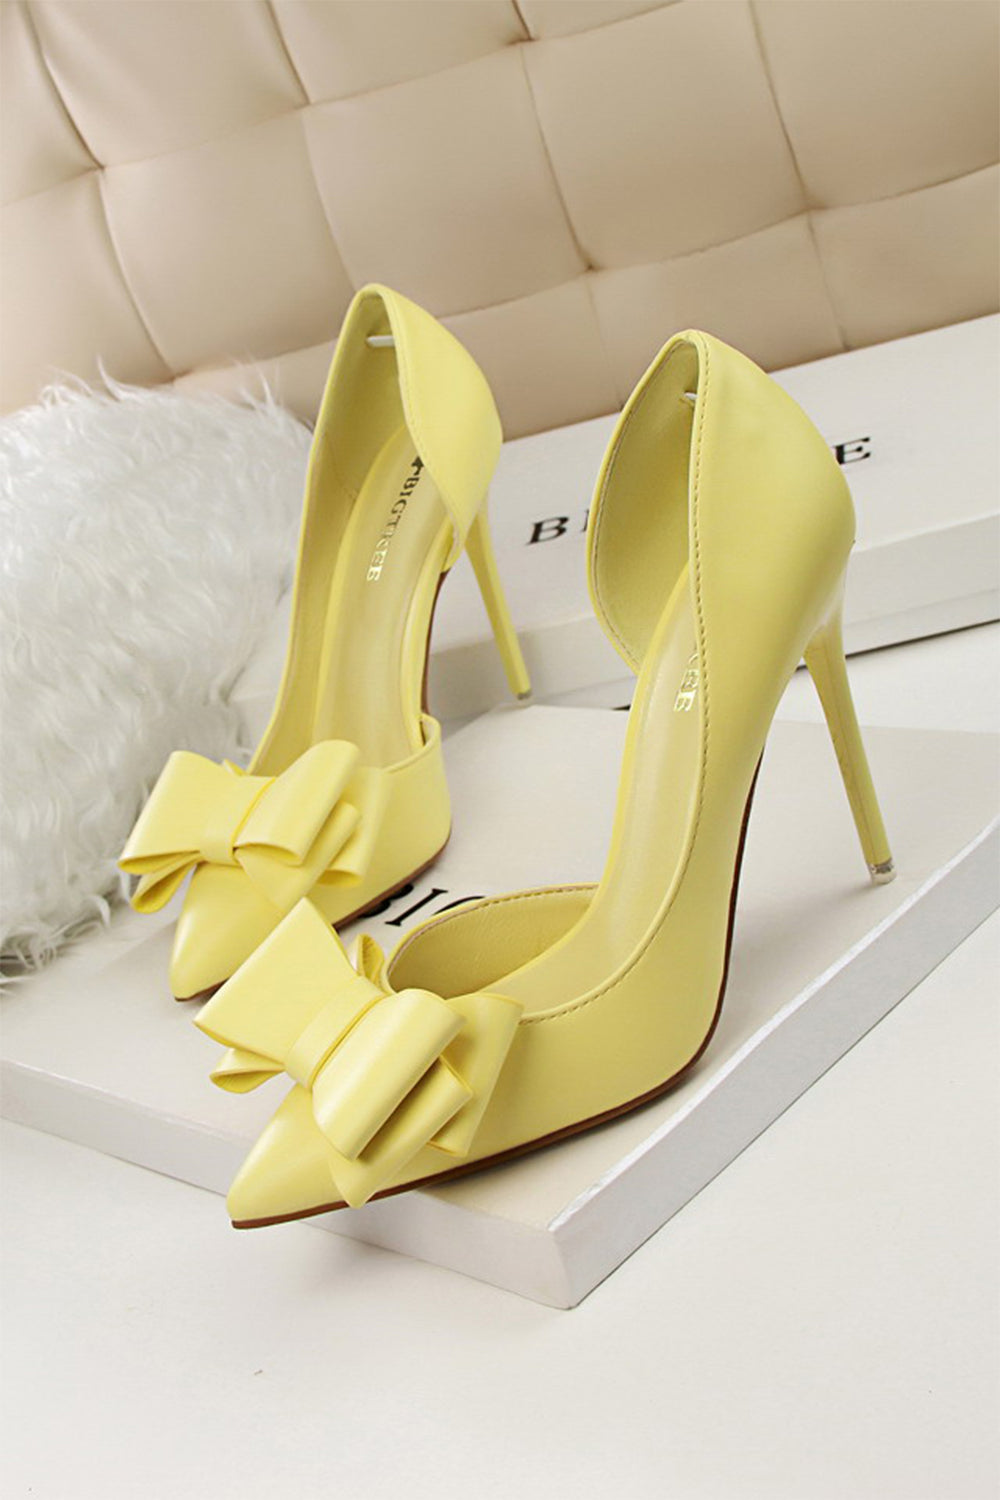 How to style yellow heels – Luminous Assembly